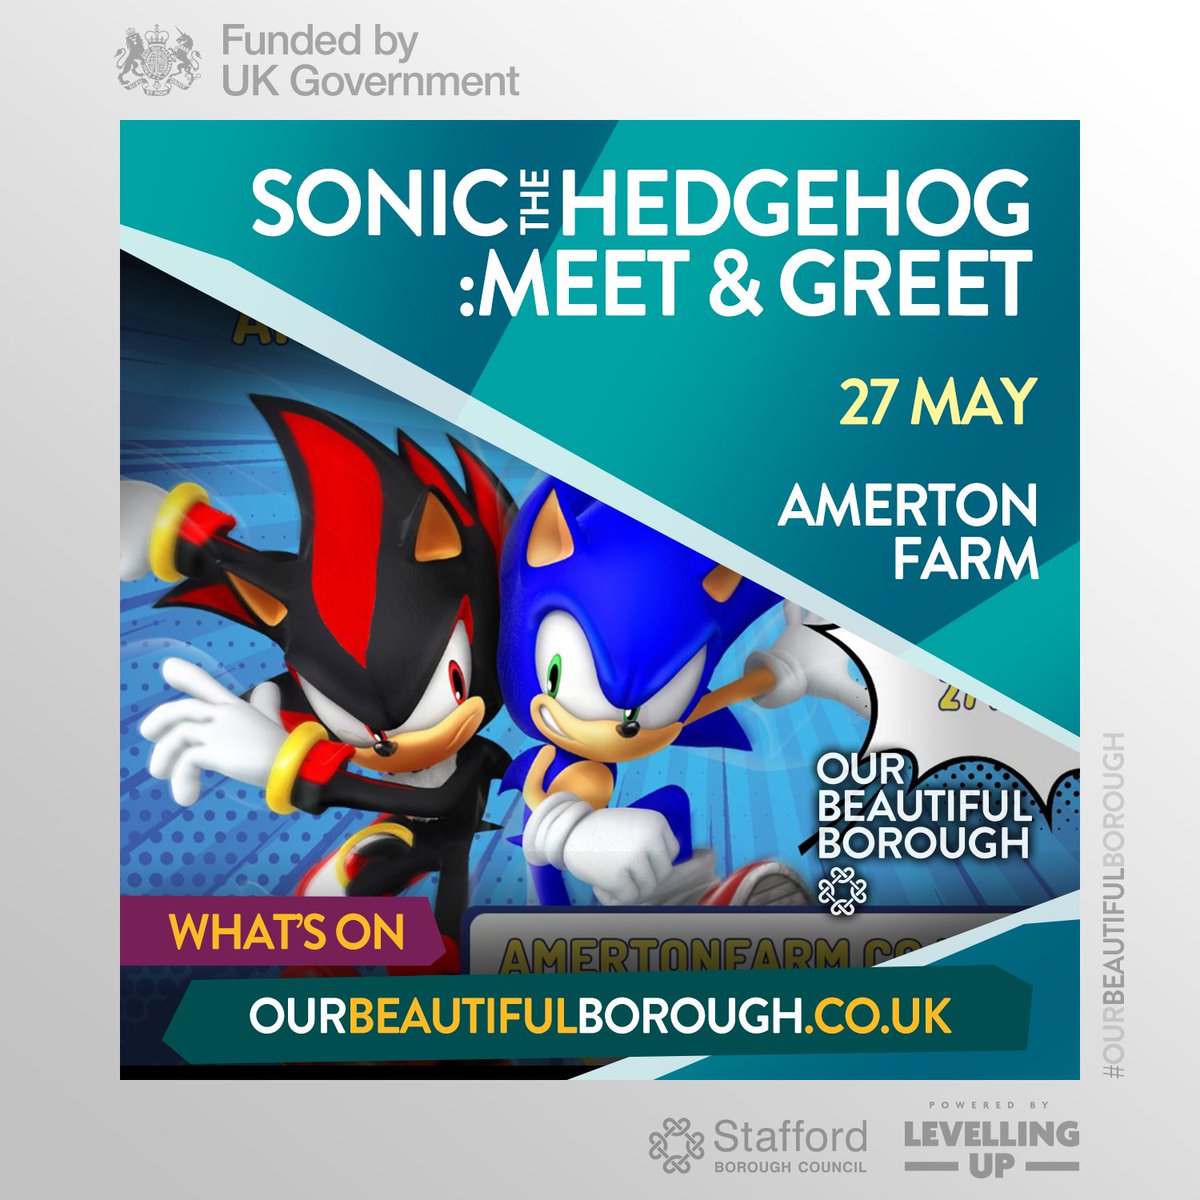 Calling all #Sonic fans! Get ready for a supersonic adventure at @AmertonFarm on 27 May, where your favourite speedy heroes will be coming straight out of the screen and into our world! Booking essential: tinyurl.com/32m9w2jd #DaysOut #FamilyFun #OurBeautifulBorough